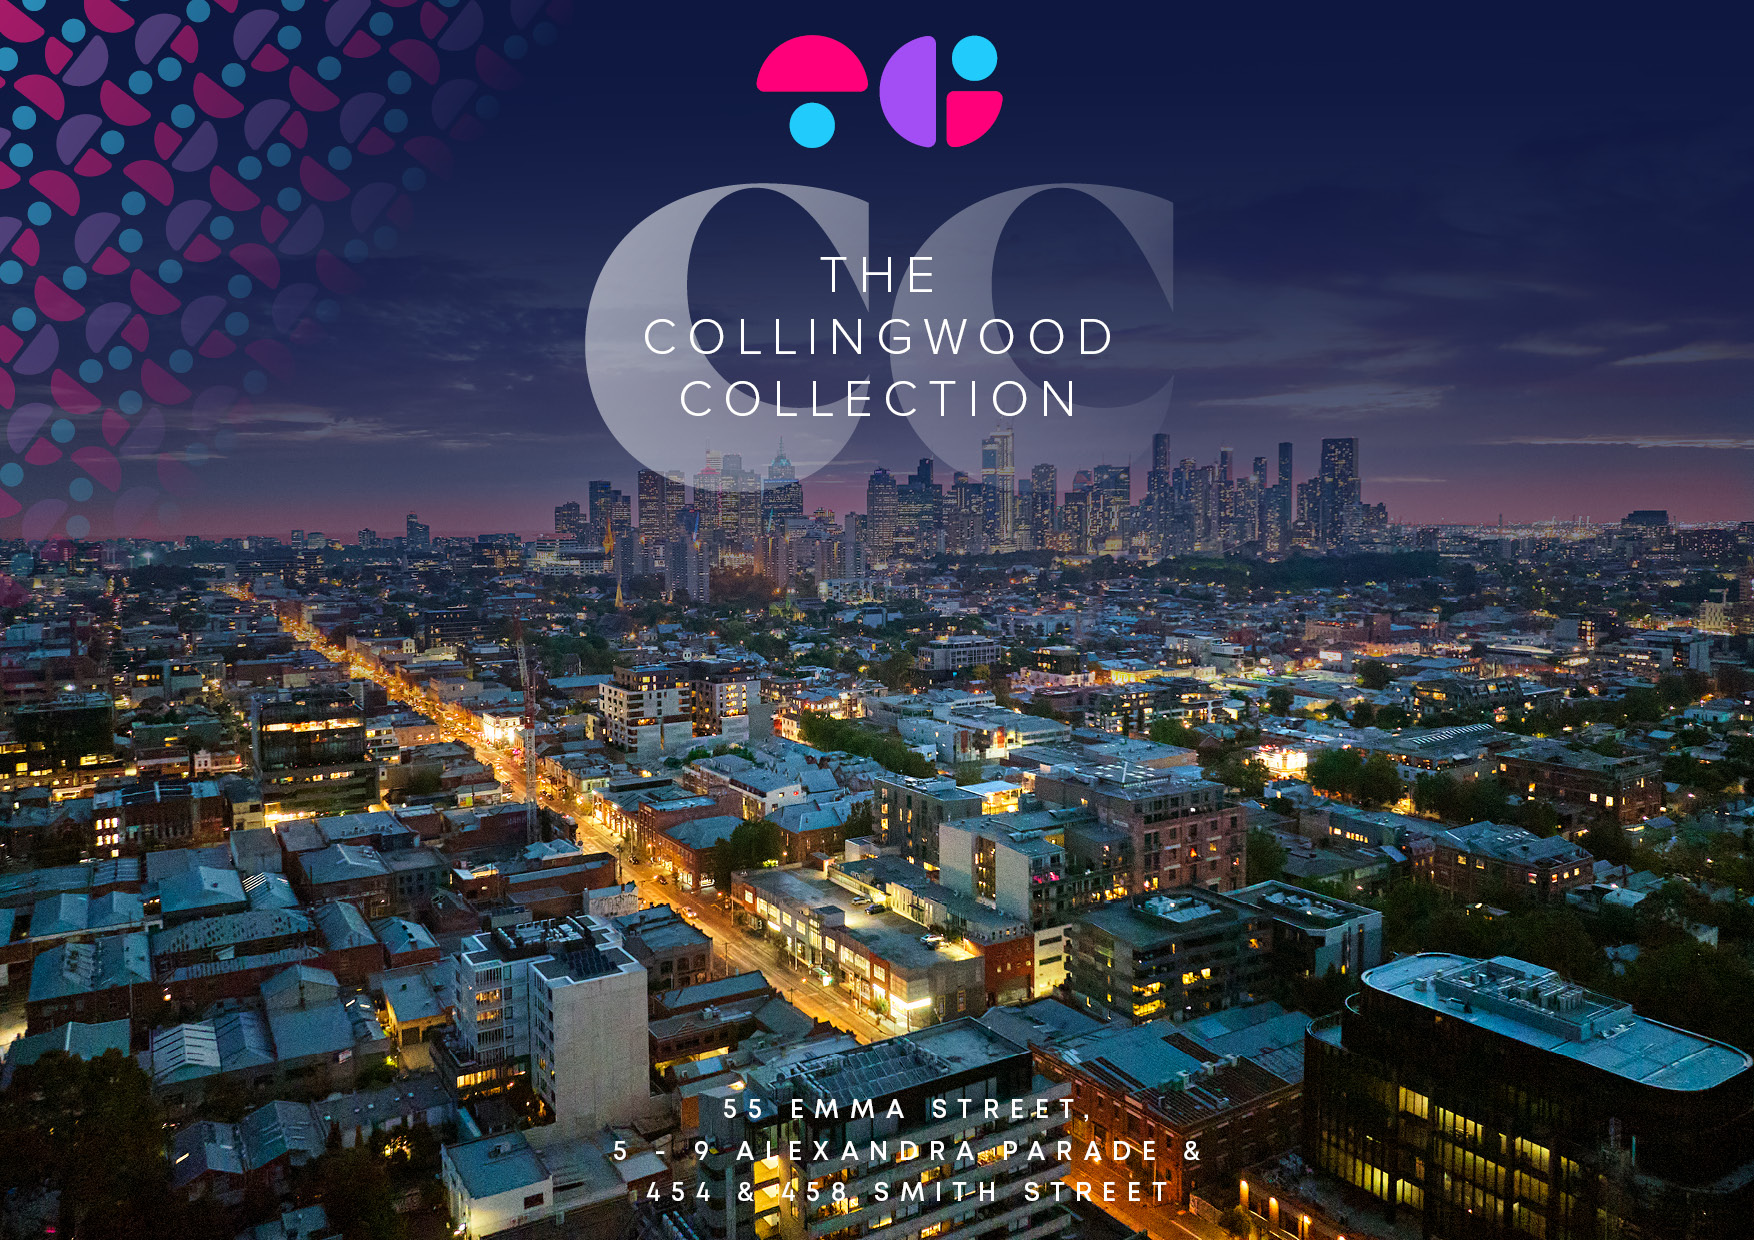 The Collingwood Collection